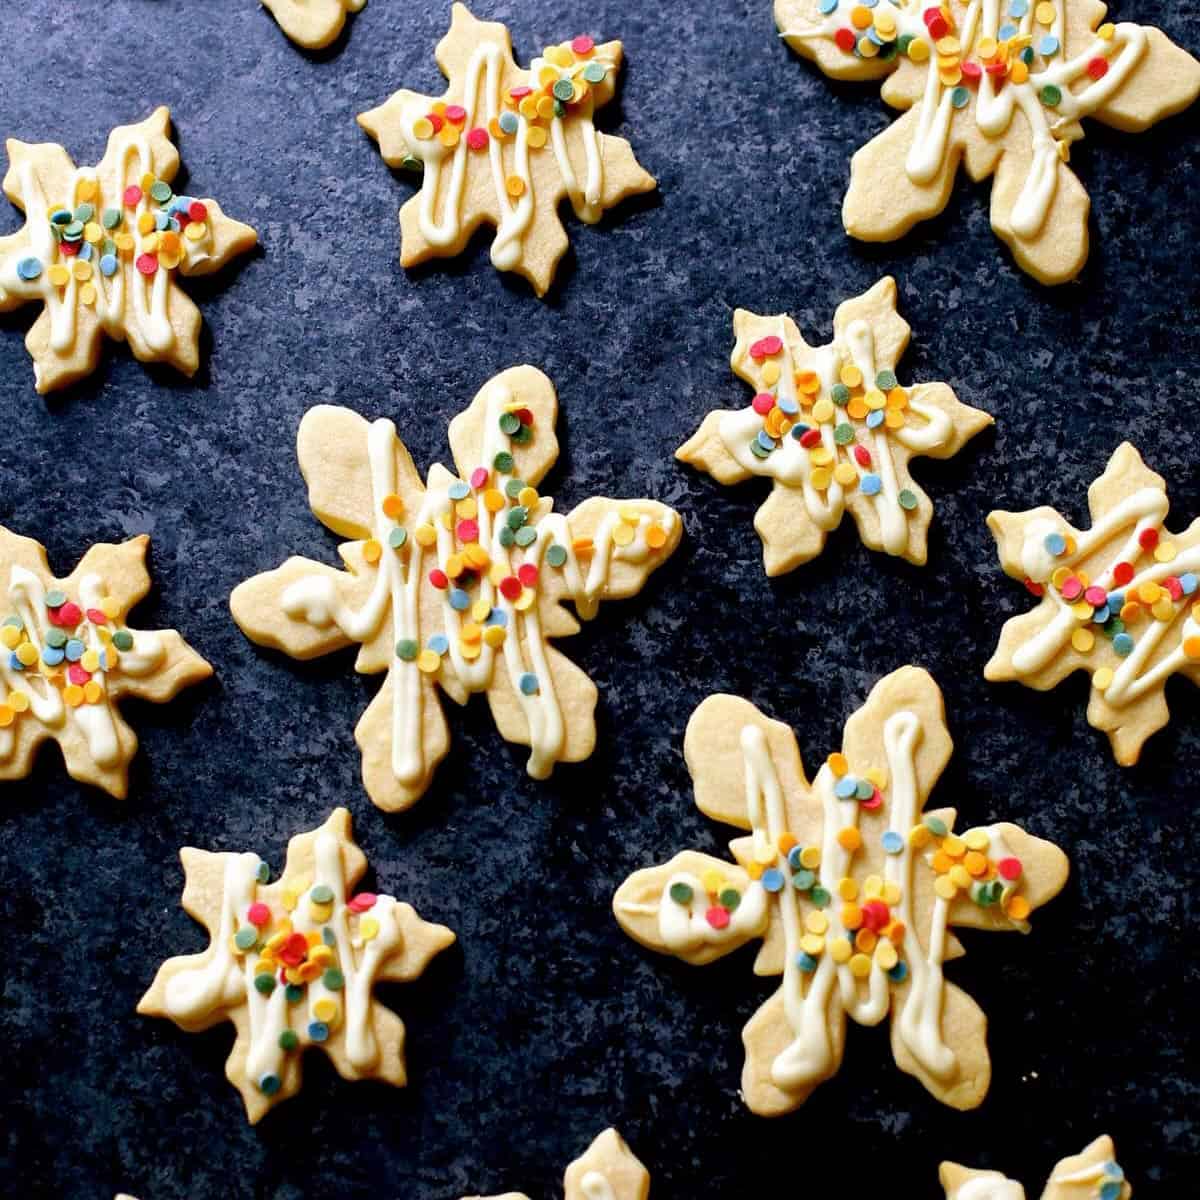 A bunch of snowflake shaped cookies with colored sprinkles.